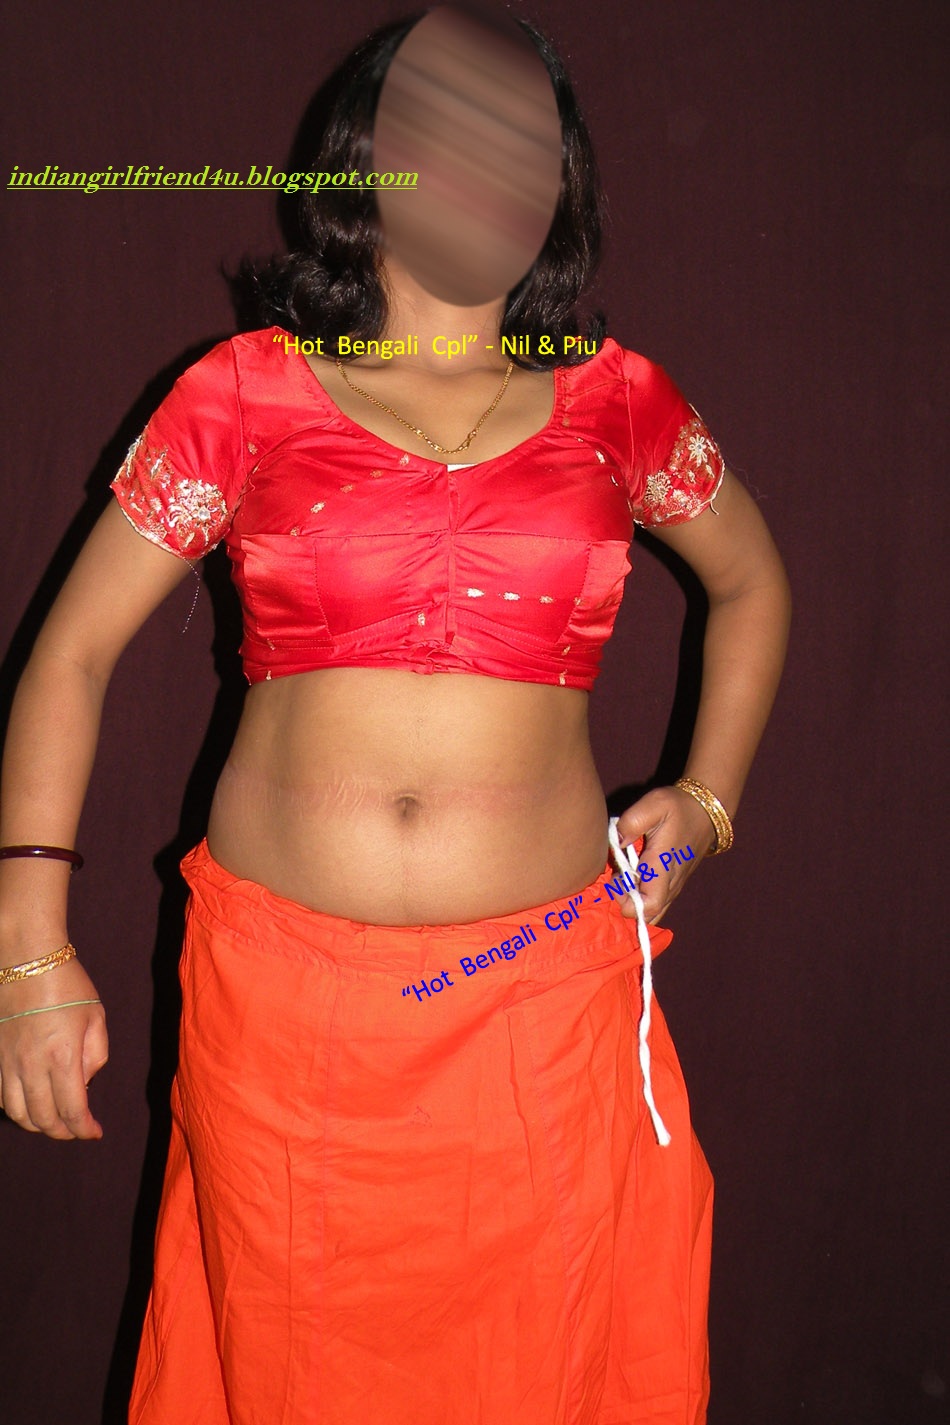 Hot Indian Girl Friends.. hot sexy sari saree Bengali house wife nude removing cloths Part- 4 picture photo